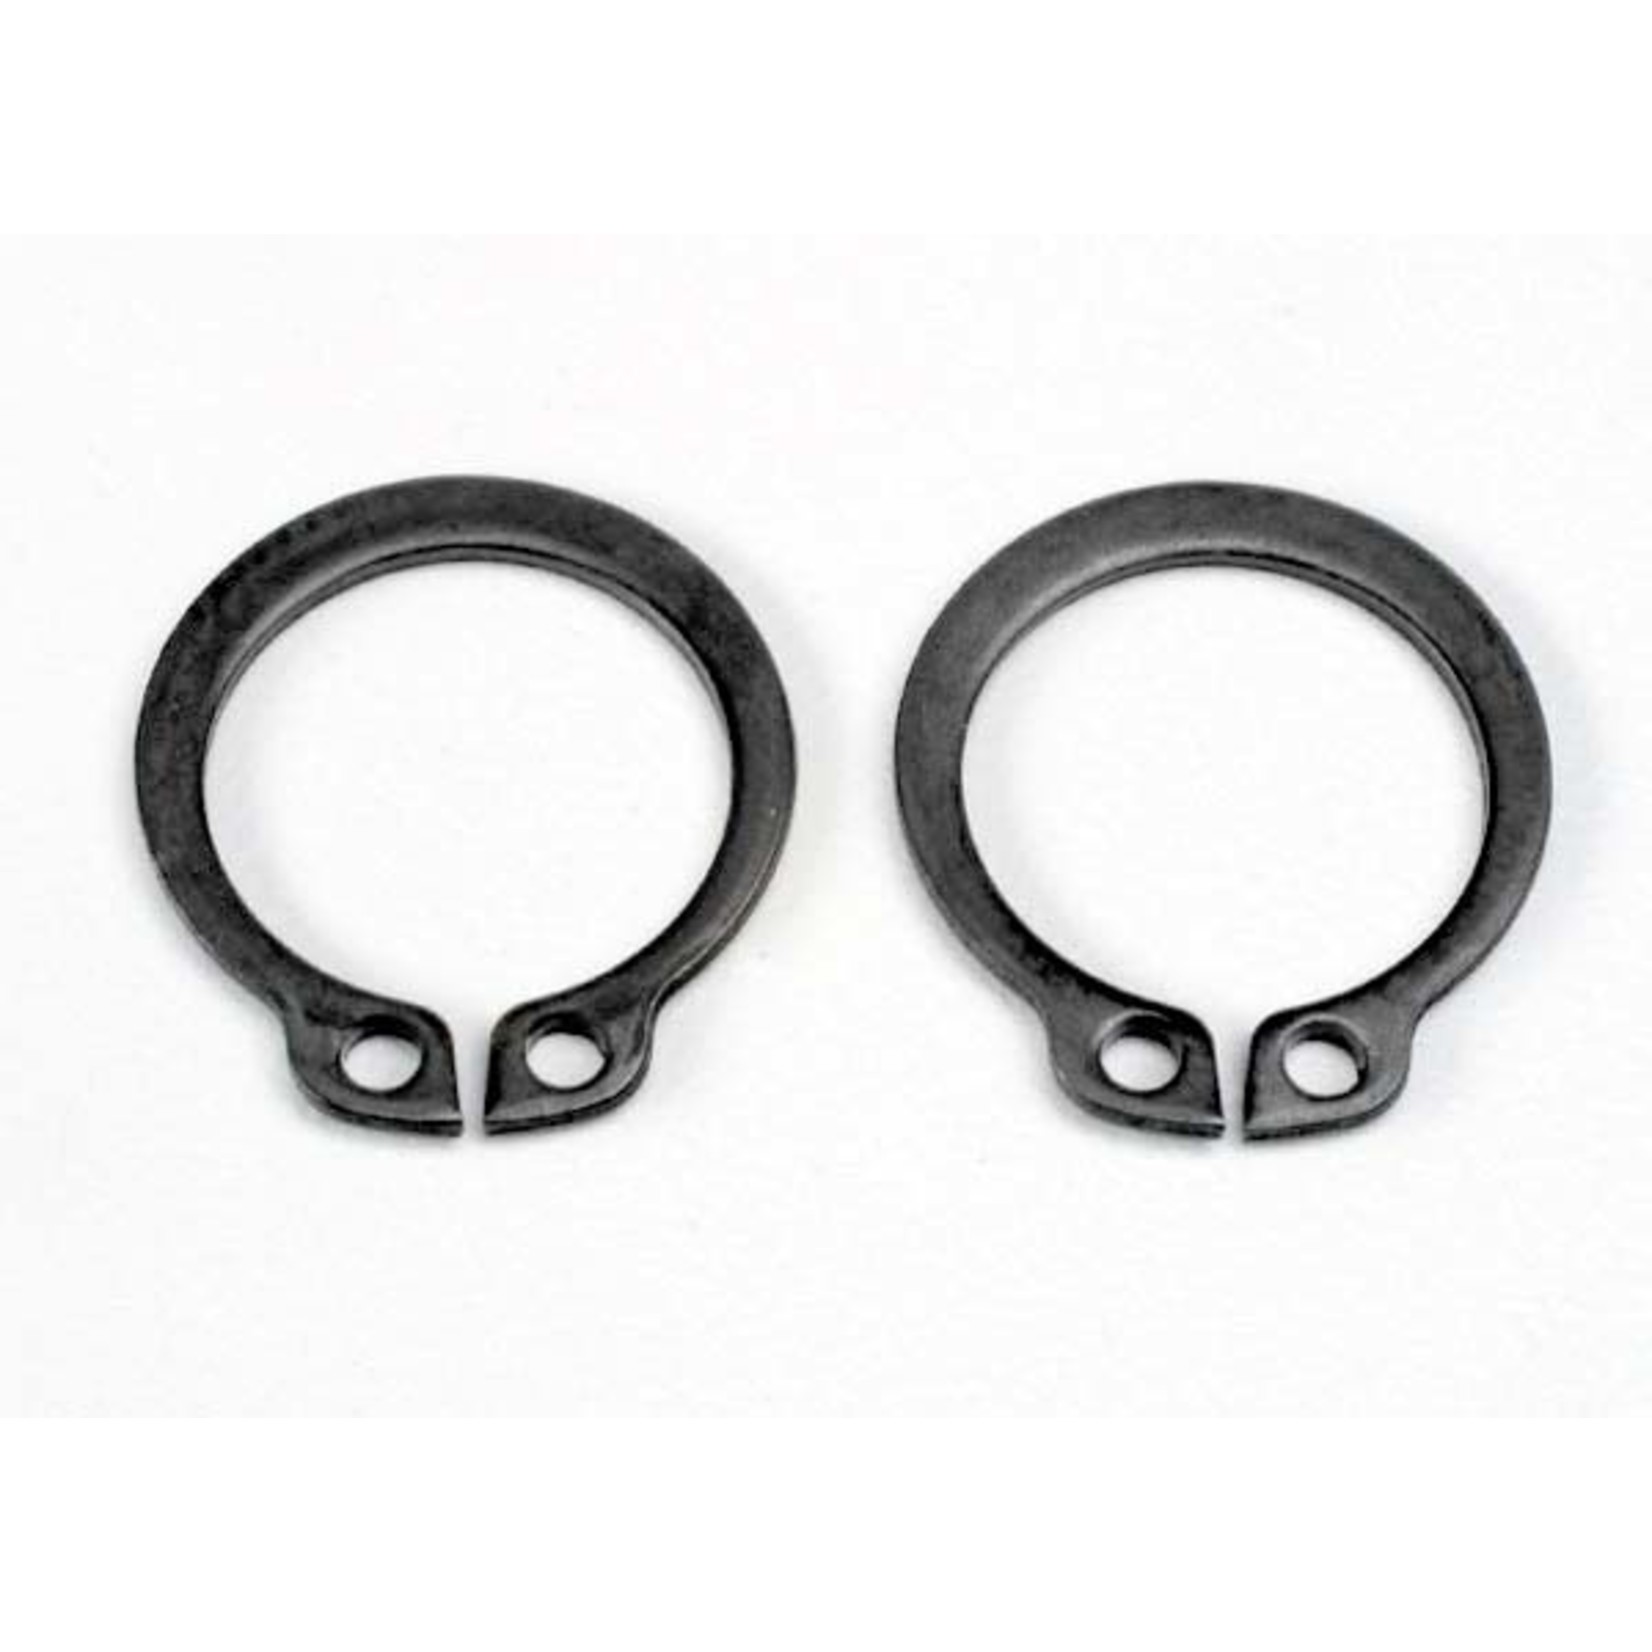 Traxxas 4987 - Rings, retainer (snap rings) (14mm) (2)